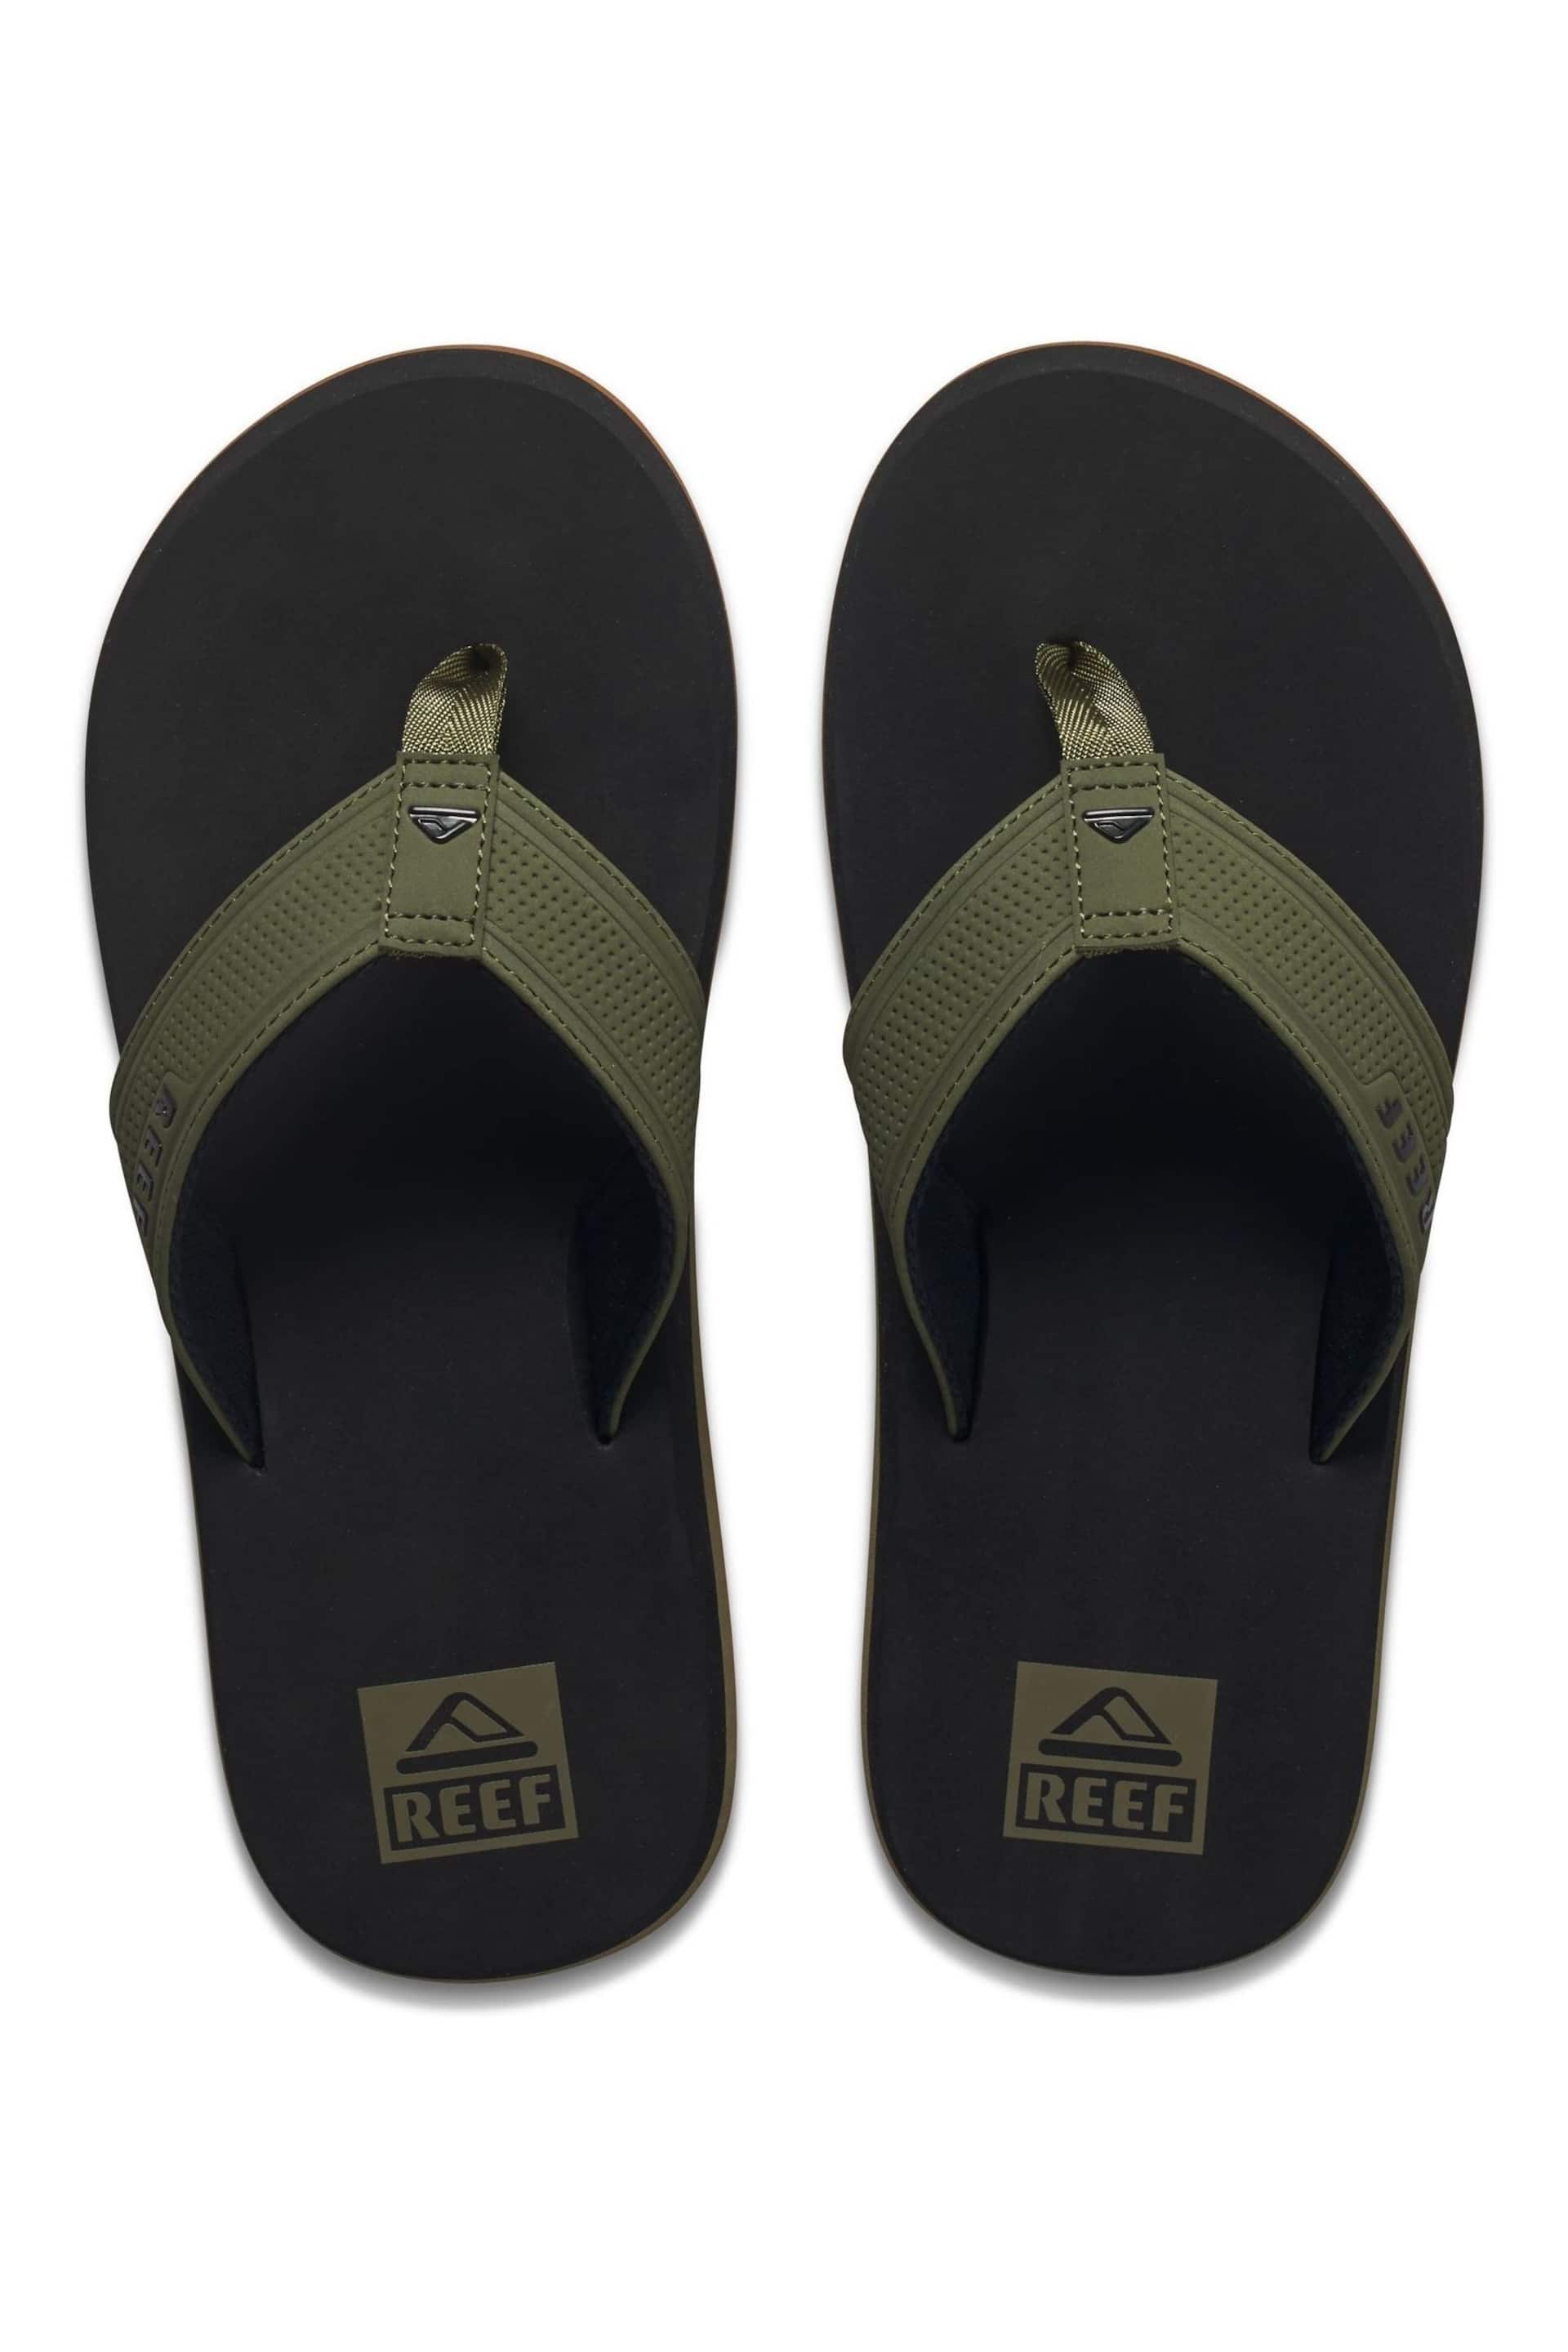 Reef The Layback Black Sandals - Image 3 of 6